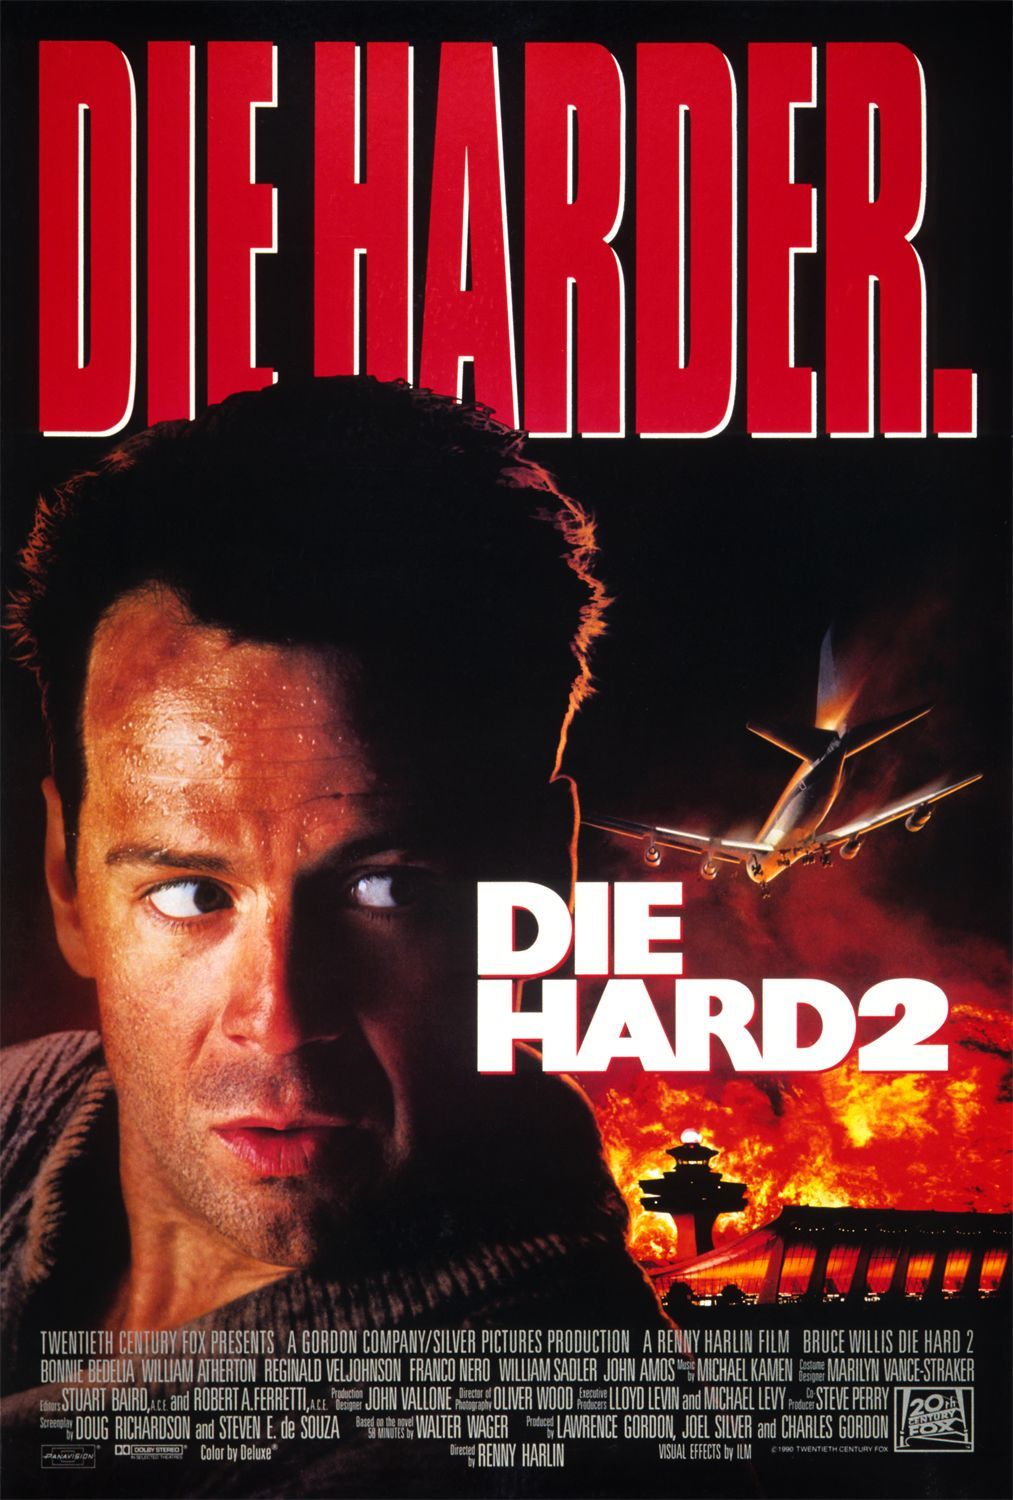 Die Hard 2 poster with Bruce Willis